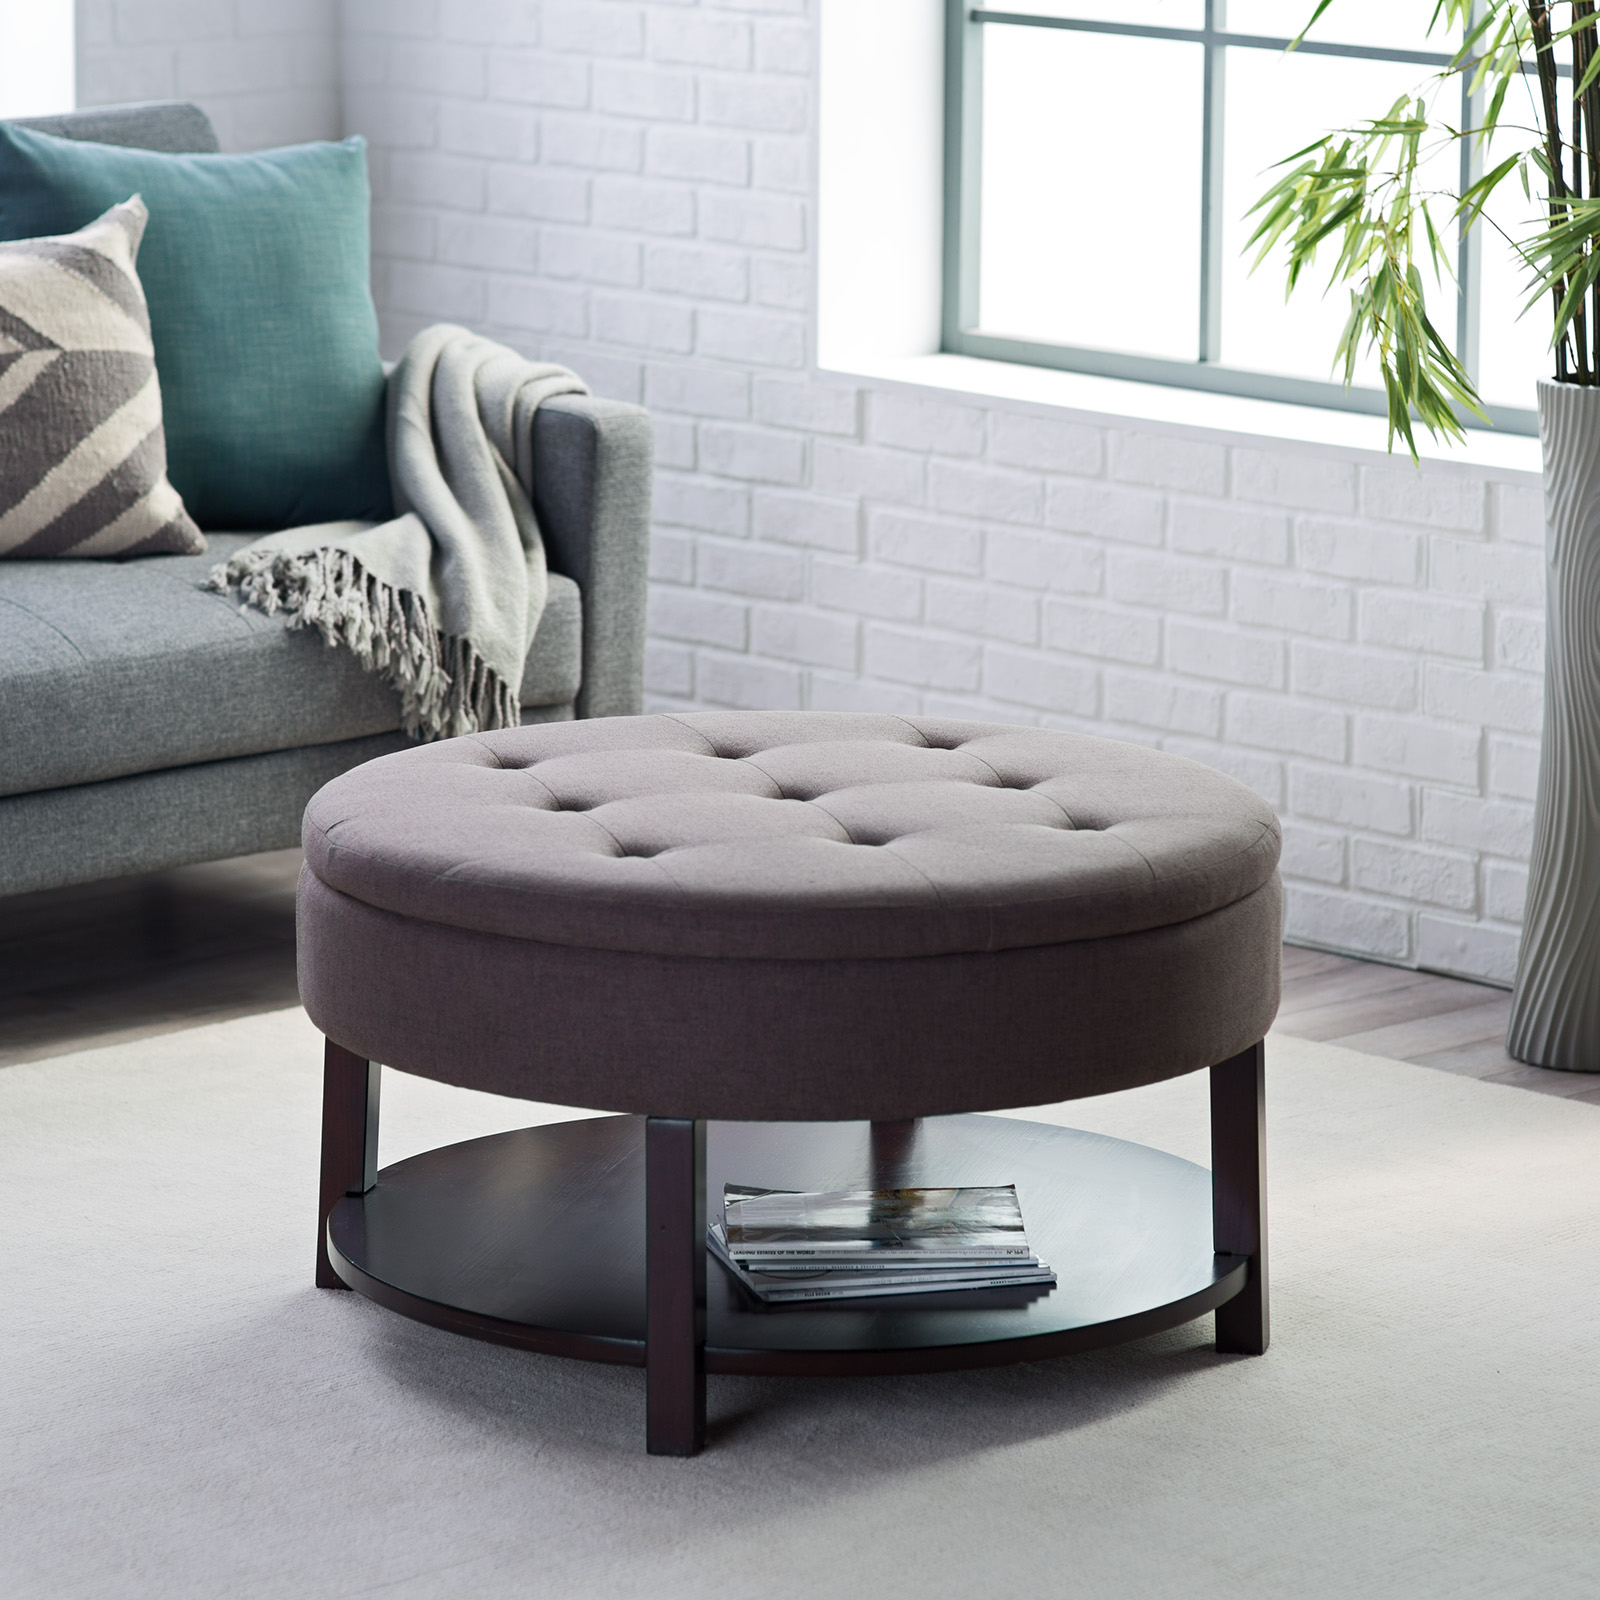 Storage Ottoman Coffee Table Visualhunt, Round Padded Coffee Table With Storage